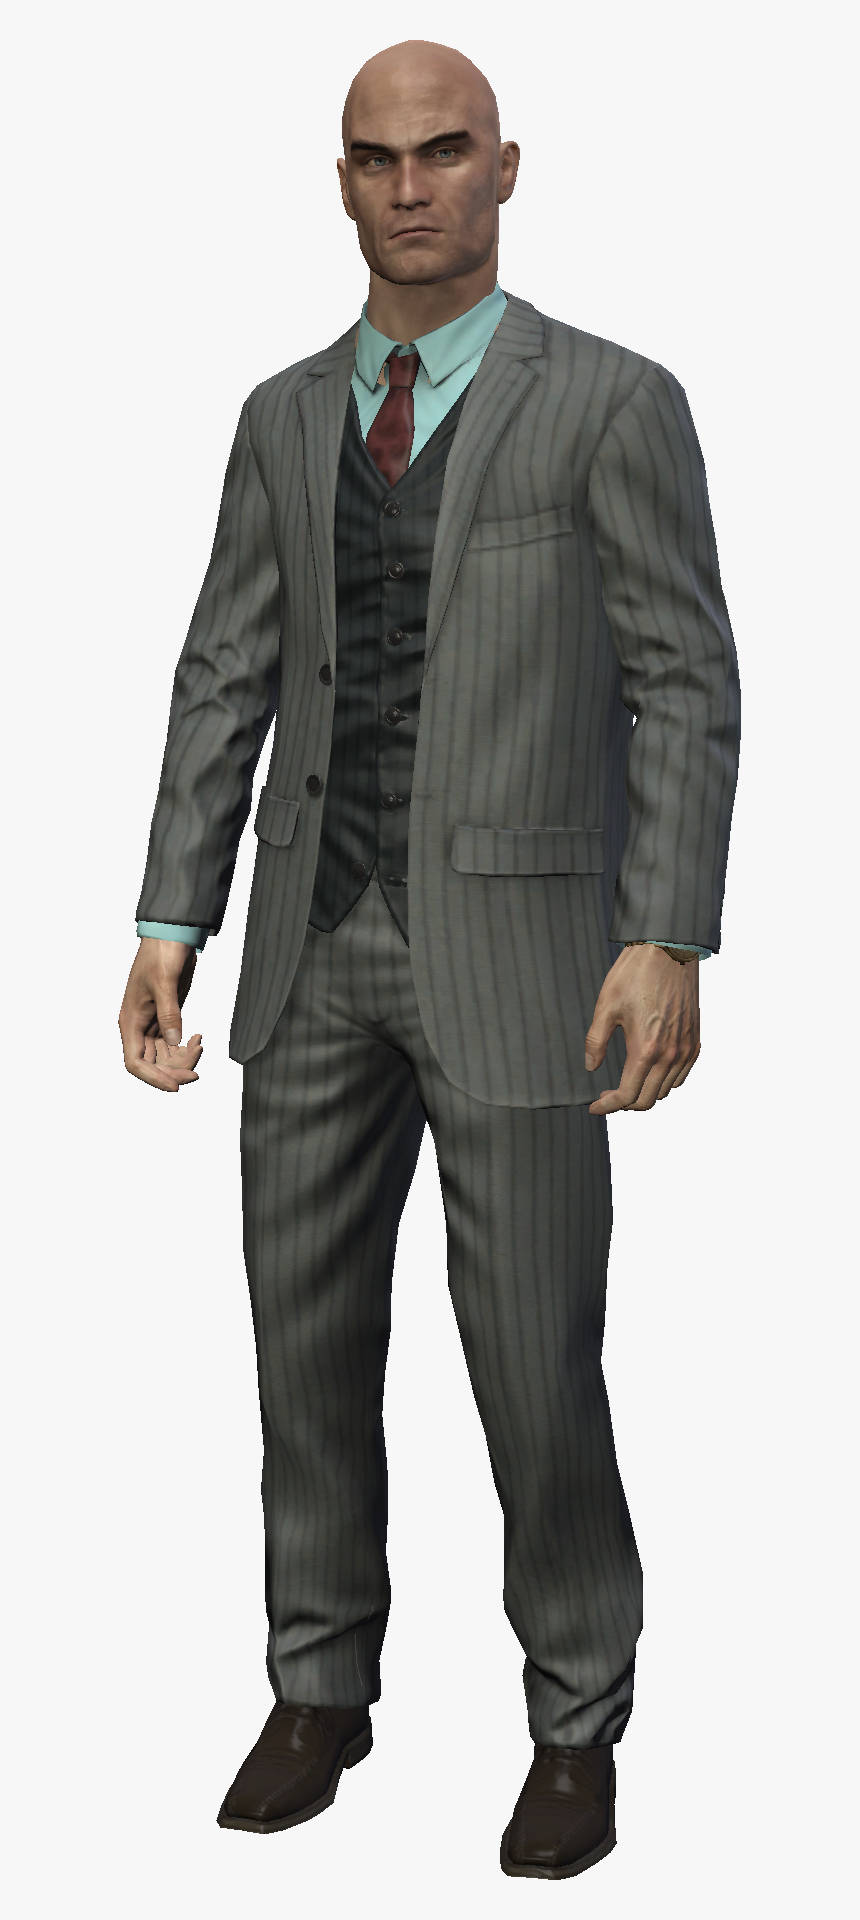 Hitman Absolution Hd Agent 47 Character